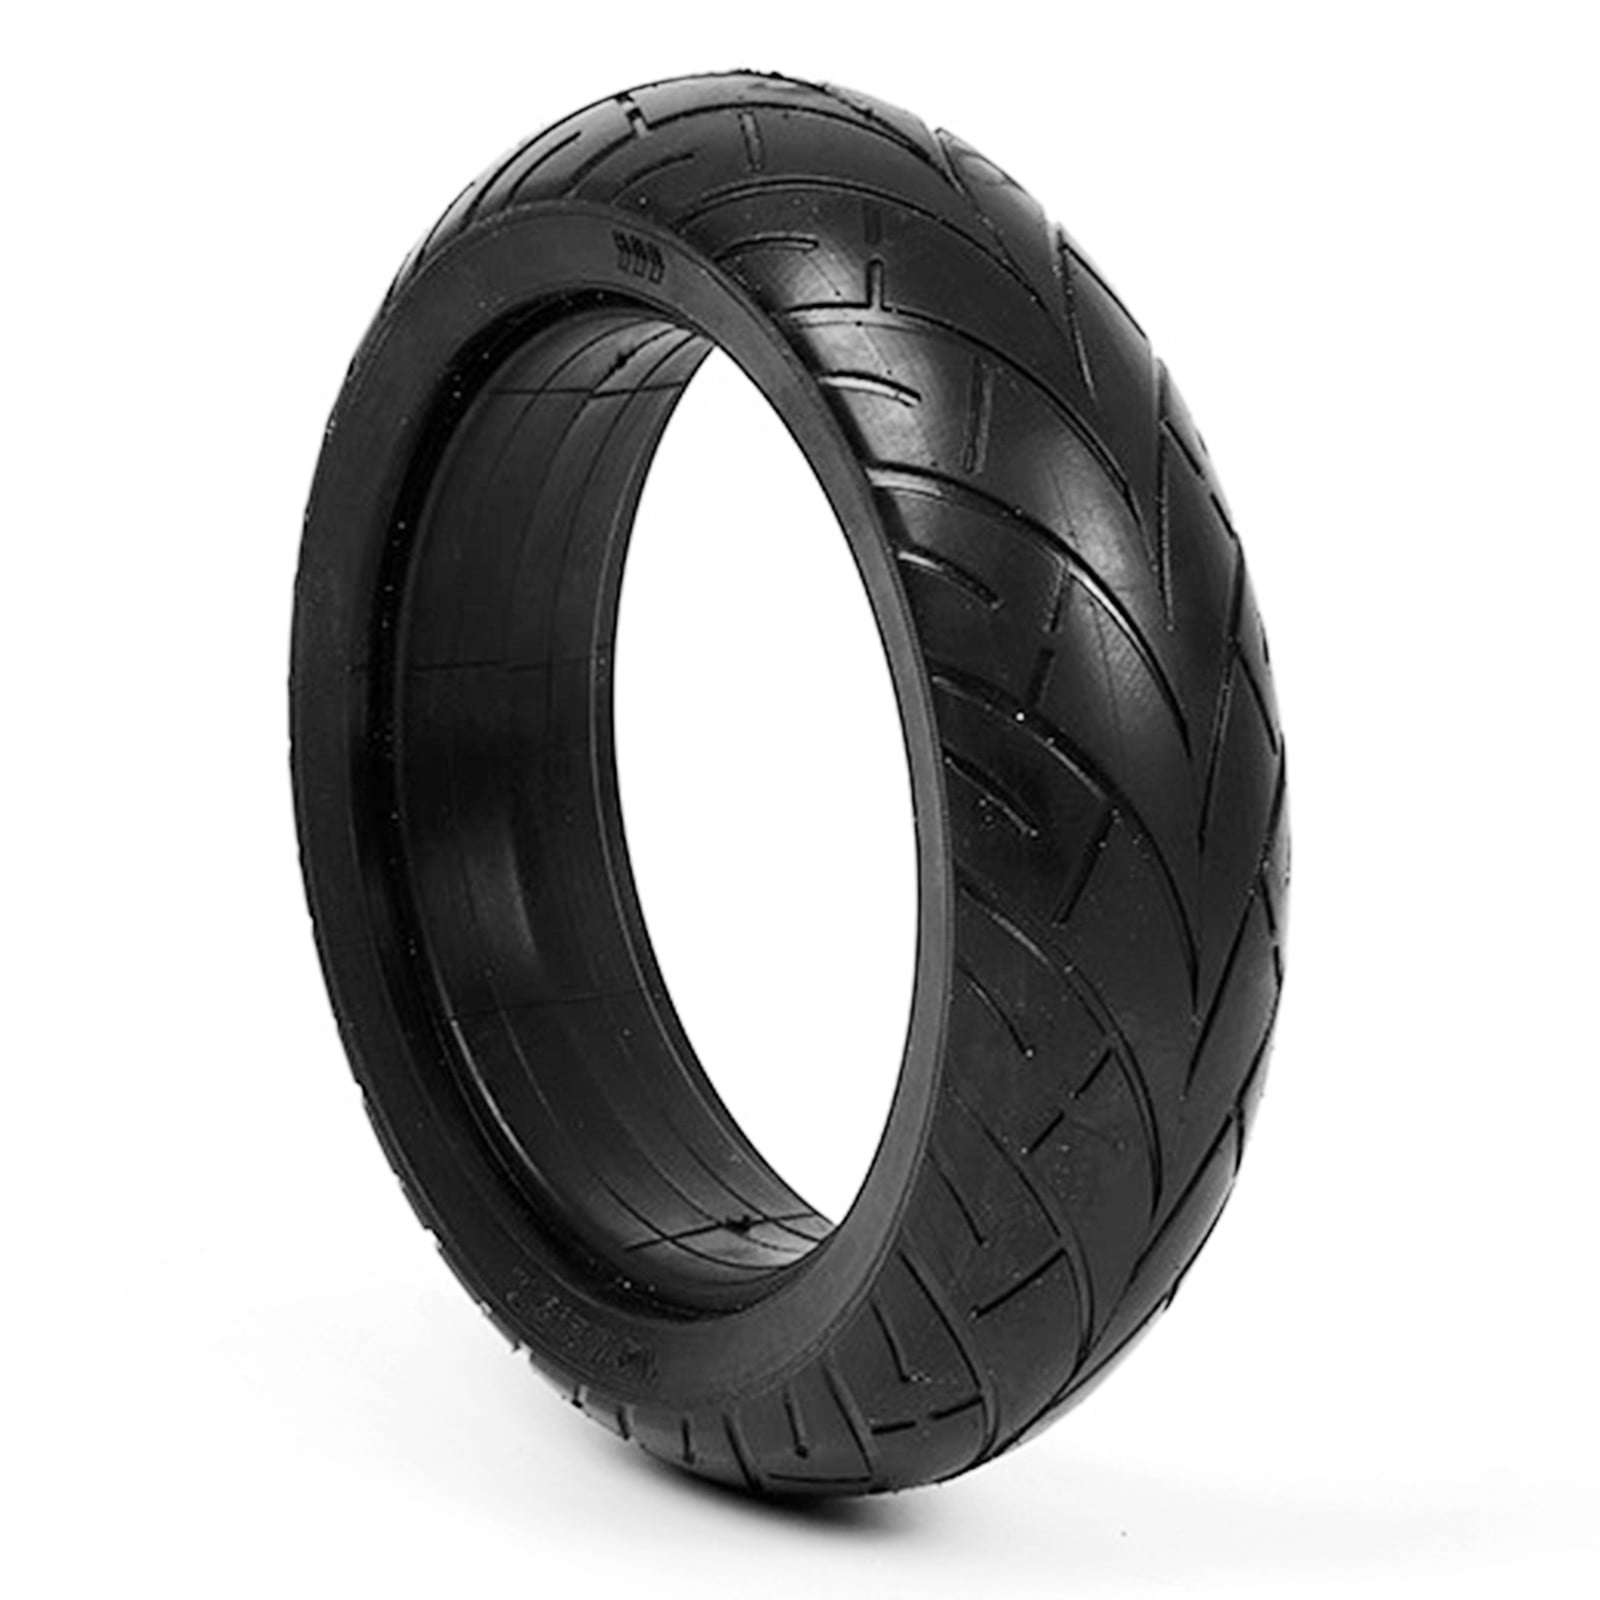 Linghuang 10-inch Tires 10x2.5 Solid Rubber Tire for Kugoo M4/M4